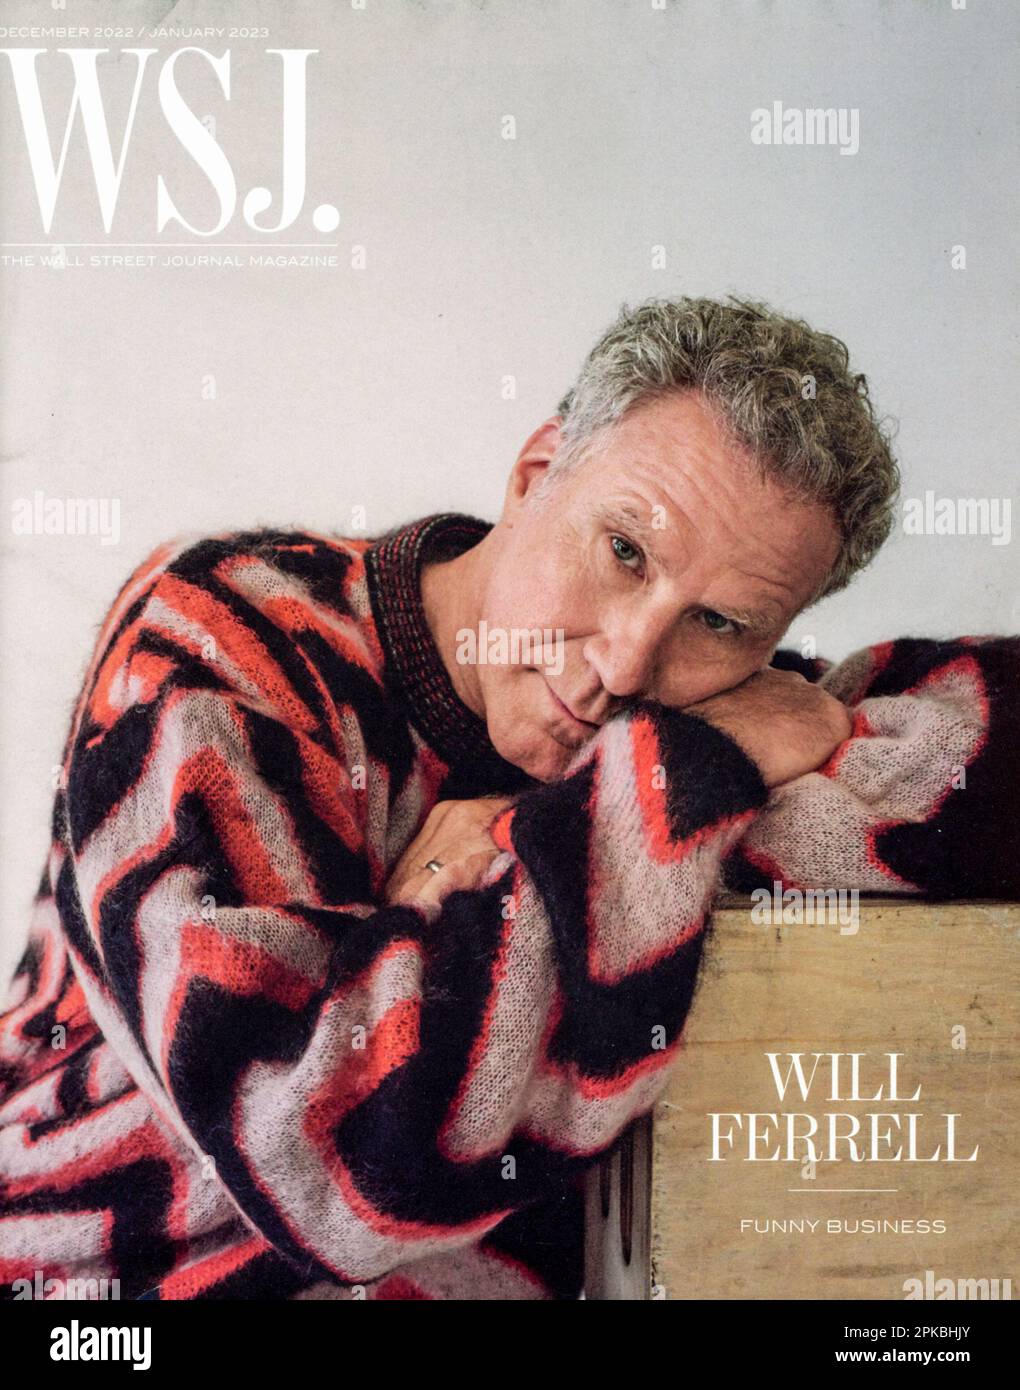 WSJ. Magazine, December 2022/January 2023 issue Cover and Advert, USA Stock Photo